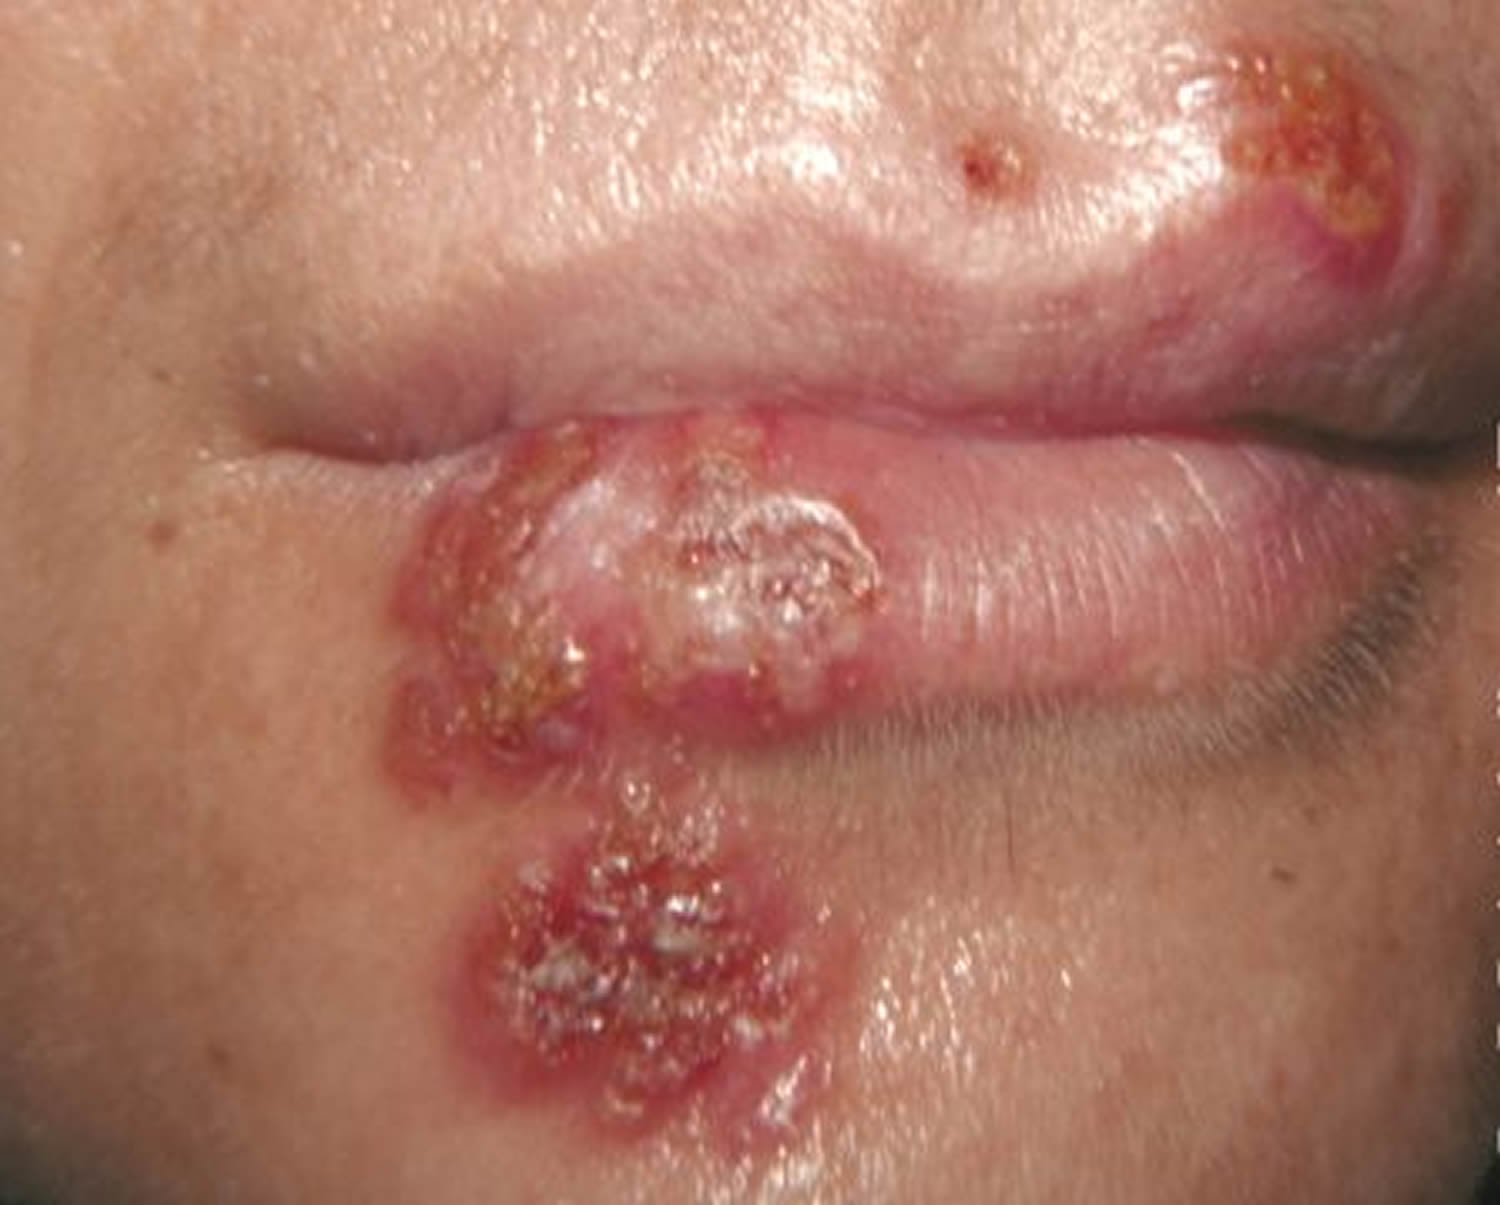 fever blisters - cold sores - lips